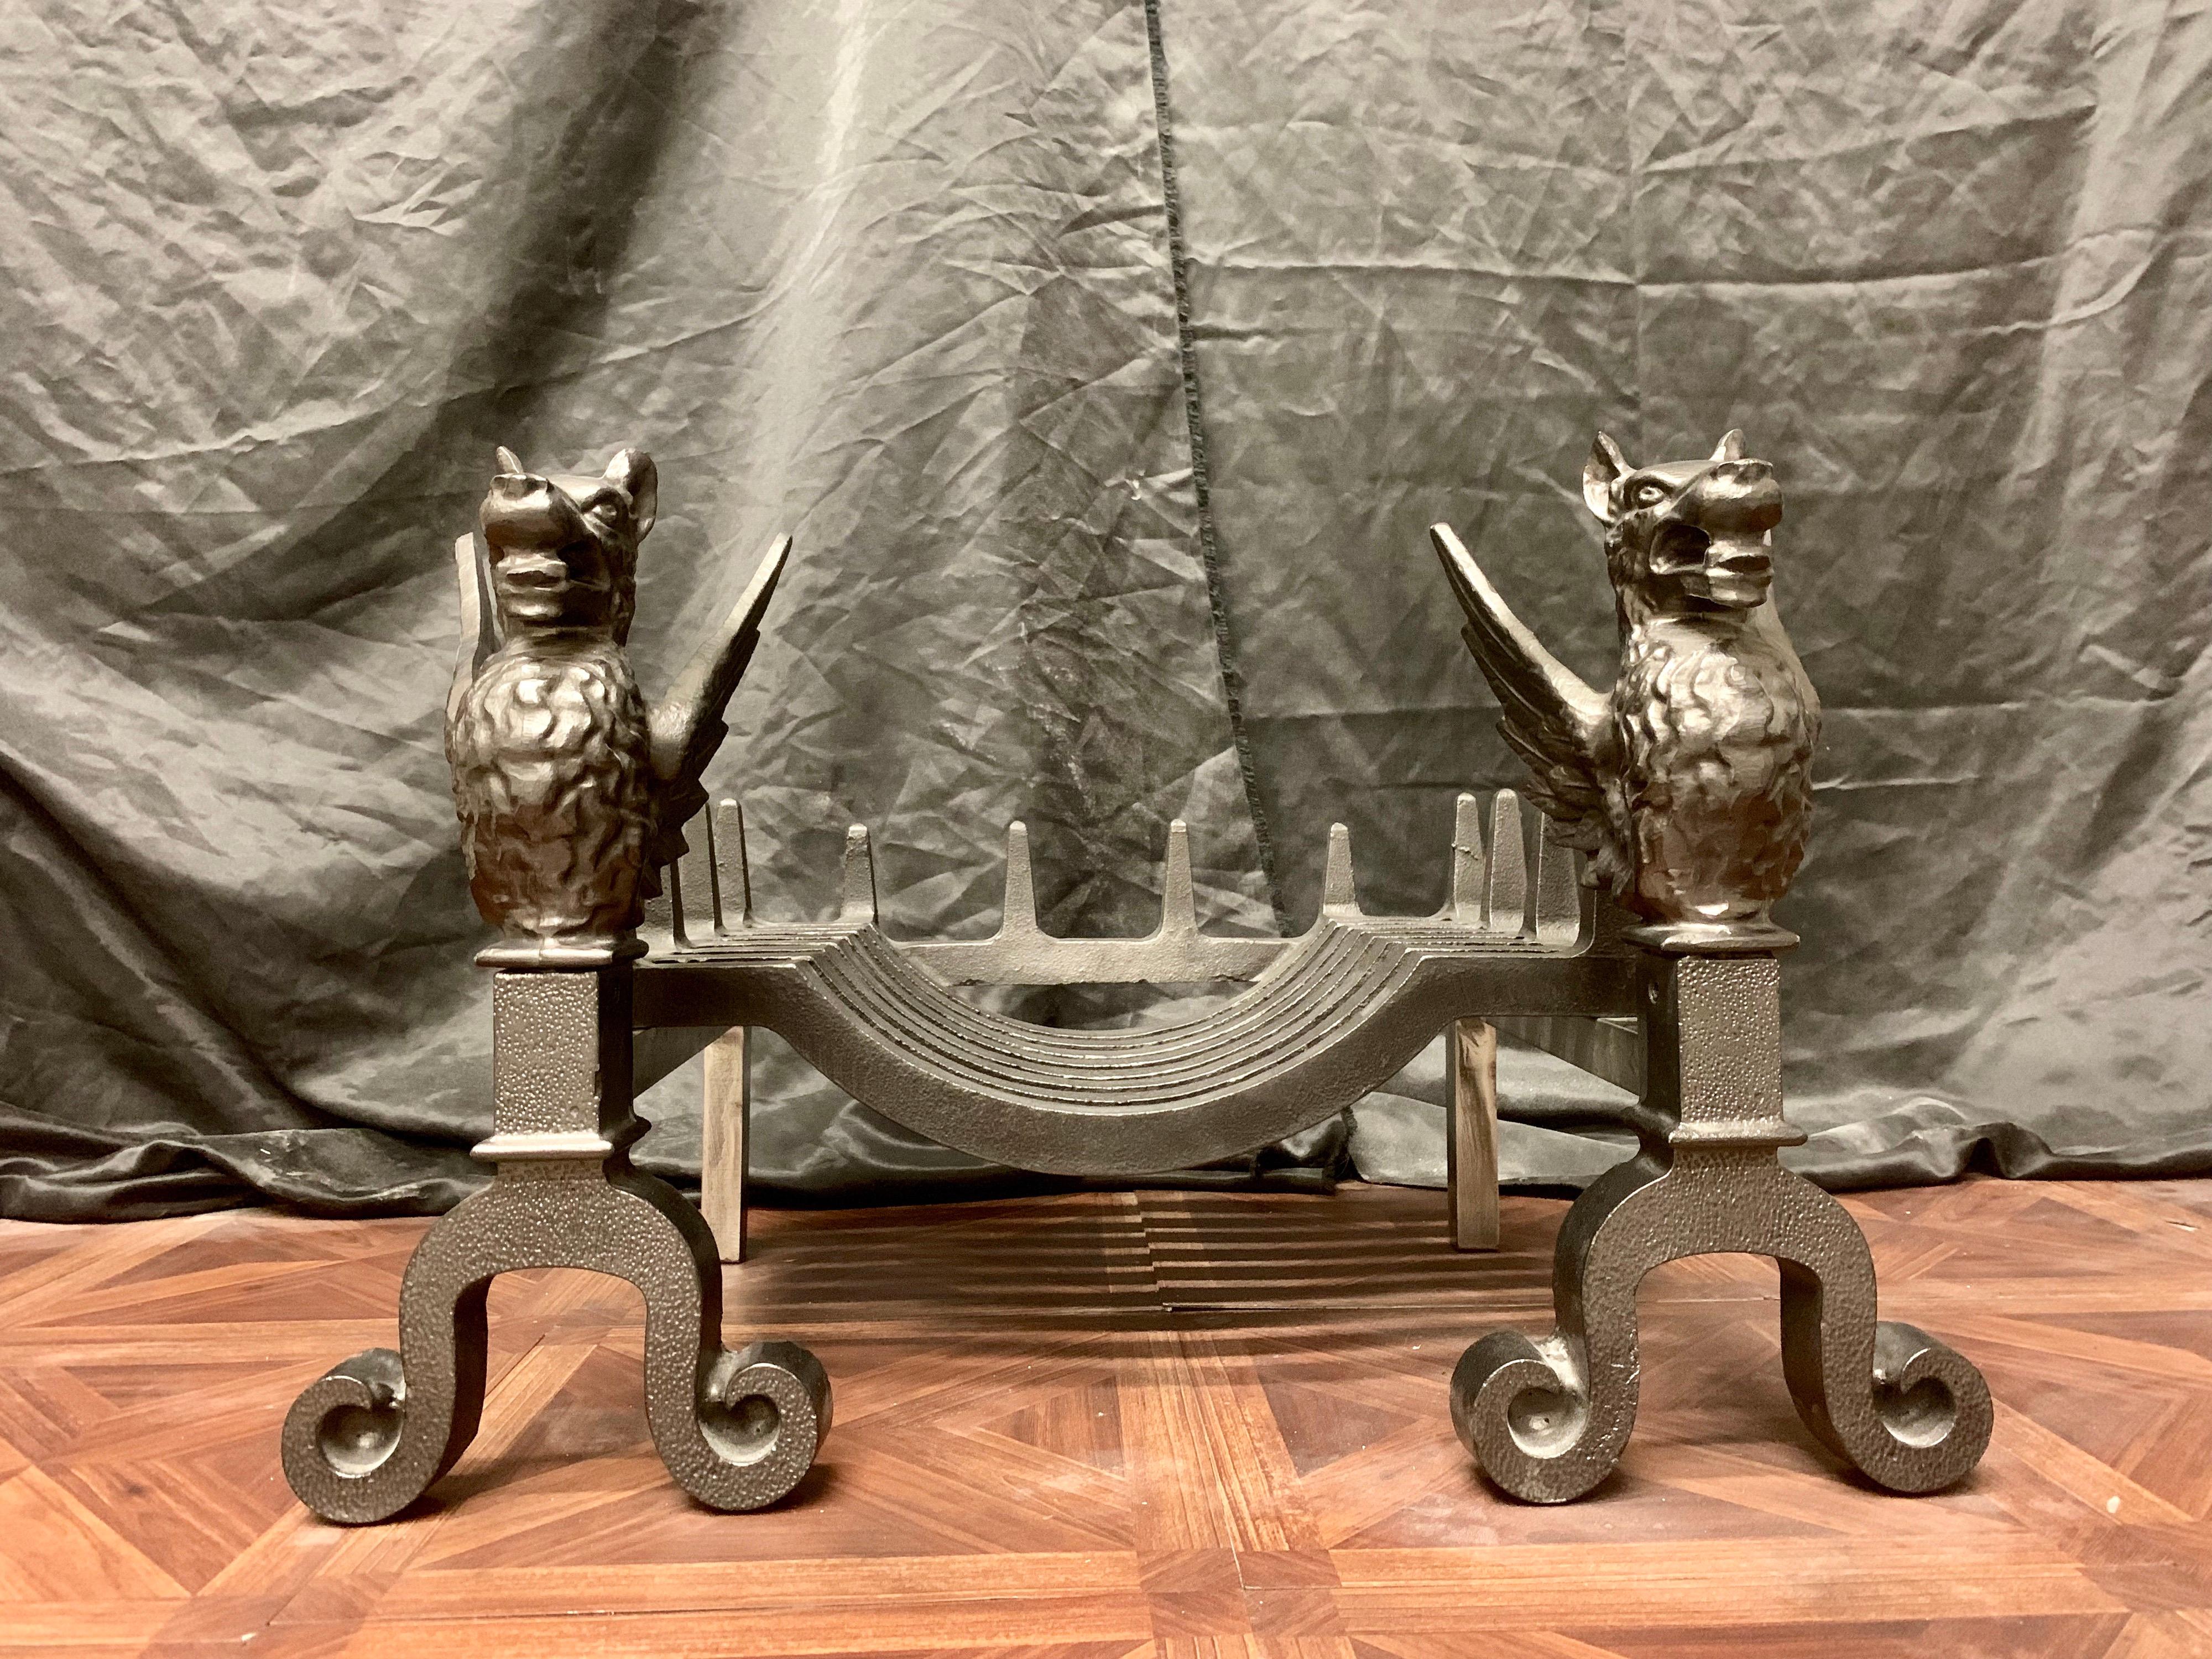 A small 19th century Victorian cast iron fire grate, with a pair of scrolled based griffins hosting the 'Swans Nest' shaped fire grate.
The significance of the mythological Griffin creature stems from Greek Mythology-the beast being half lion, half